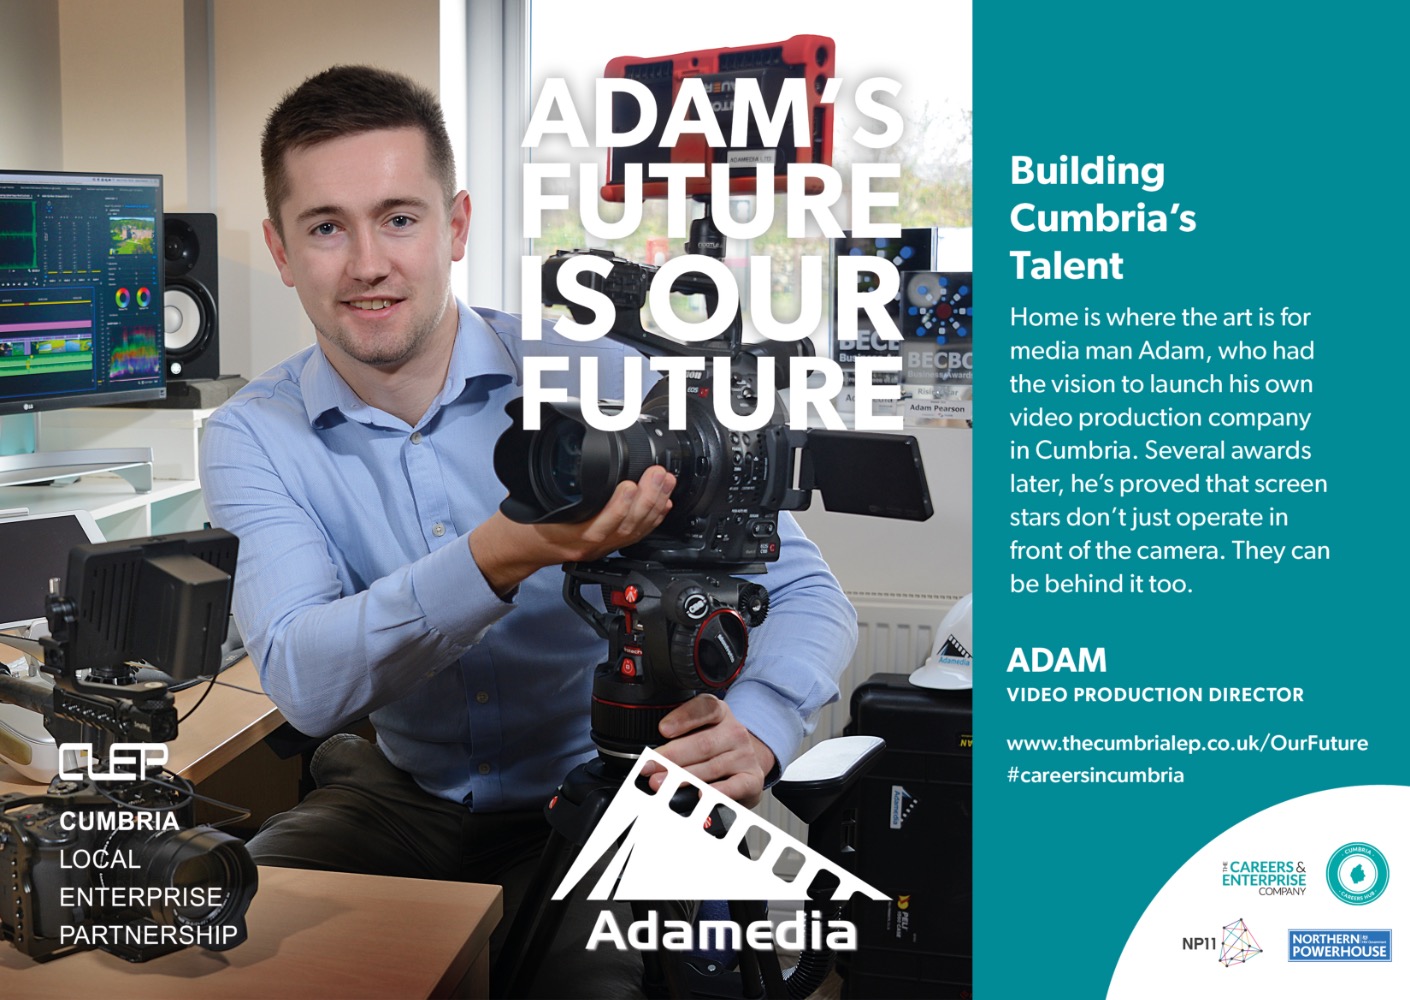 Building Cumbria's Talent - Home is where the art is for media man Adam, who had the vision to launch his own video production company in Cumbria. Several awards later, he's proved that screen stars don't just operate in front of the camera. They can be behind it too. (Photo of Adam, video production director).